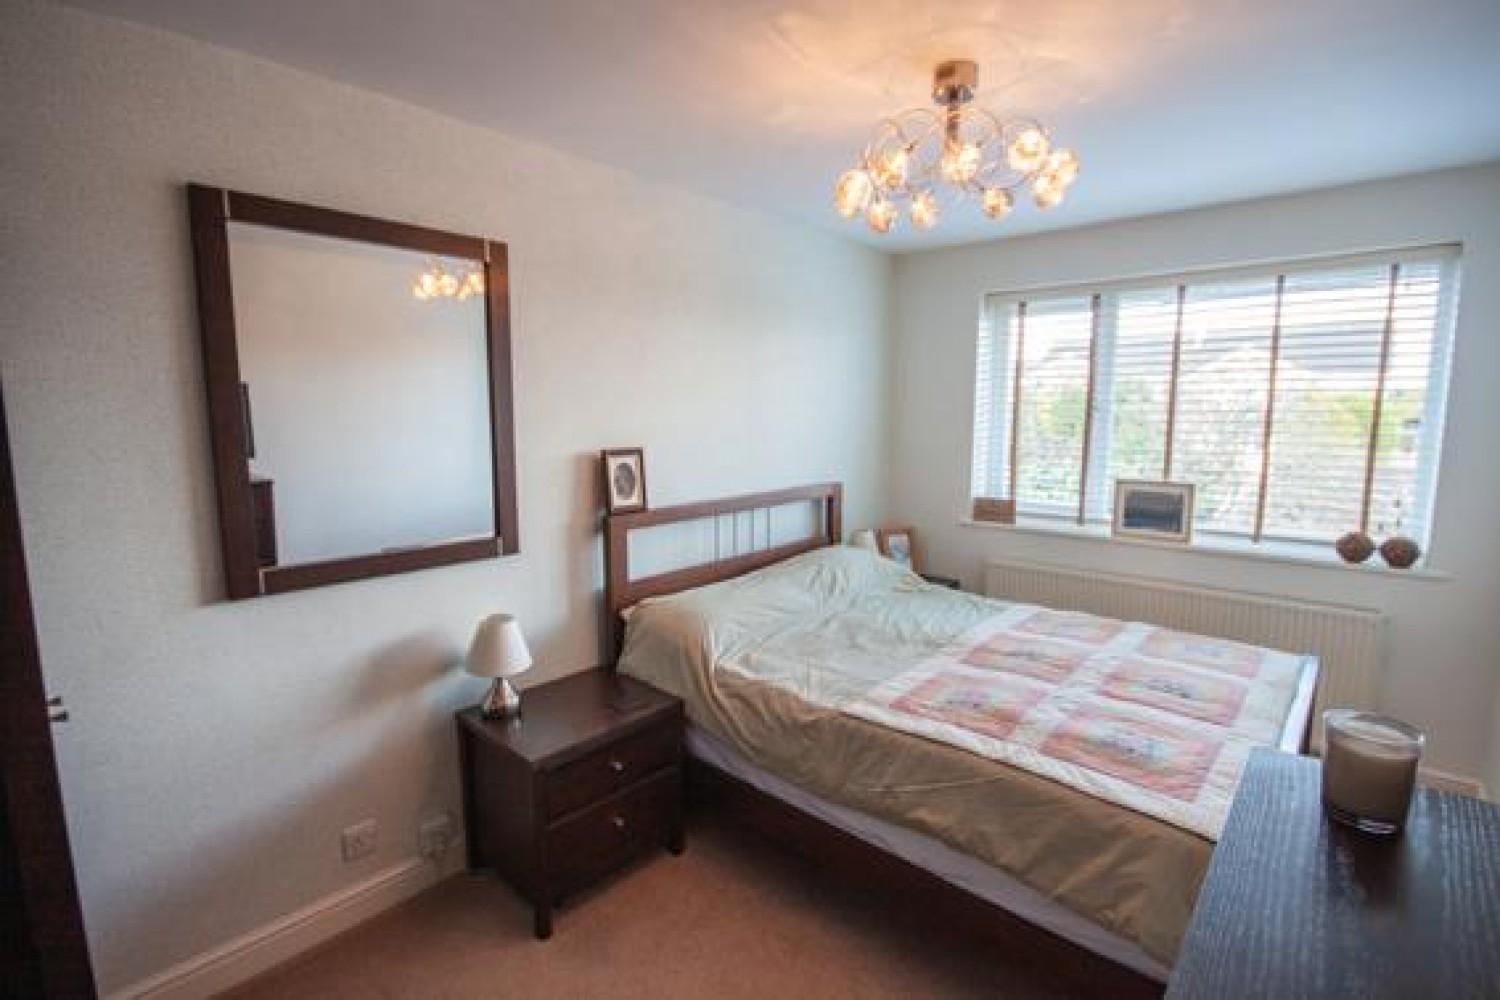 Cannock Road, Burntwood, WS7 0BS